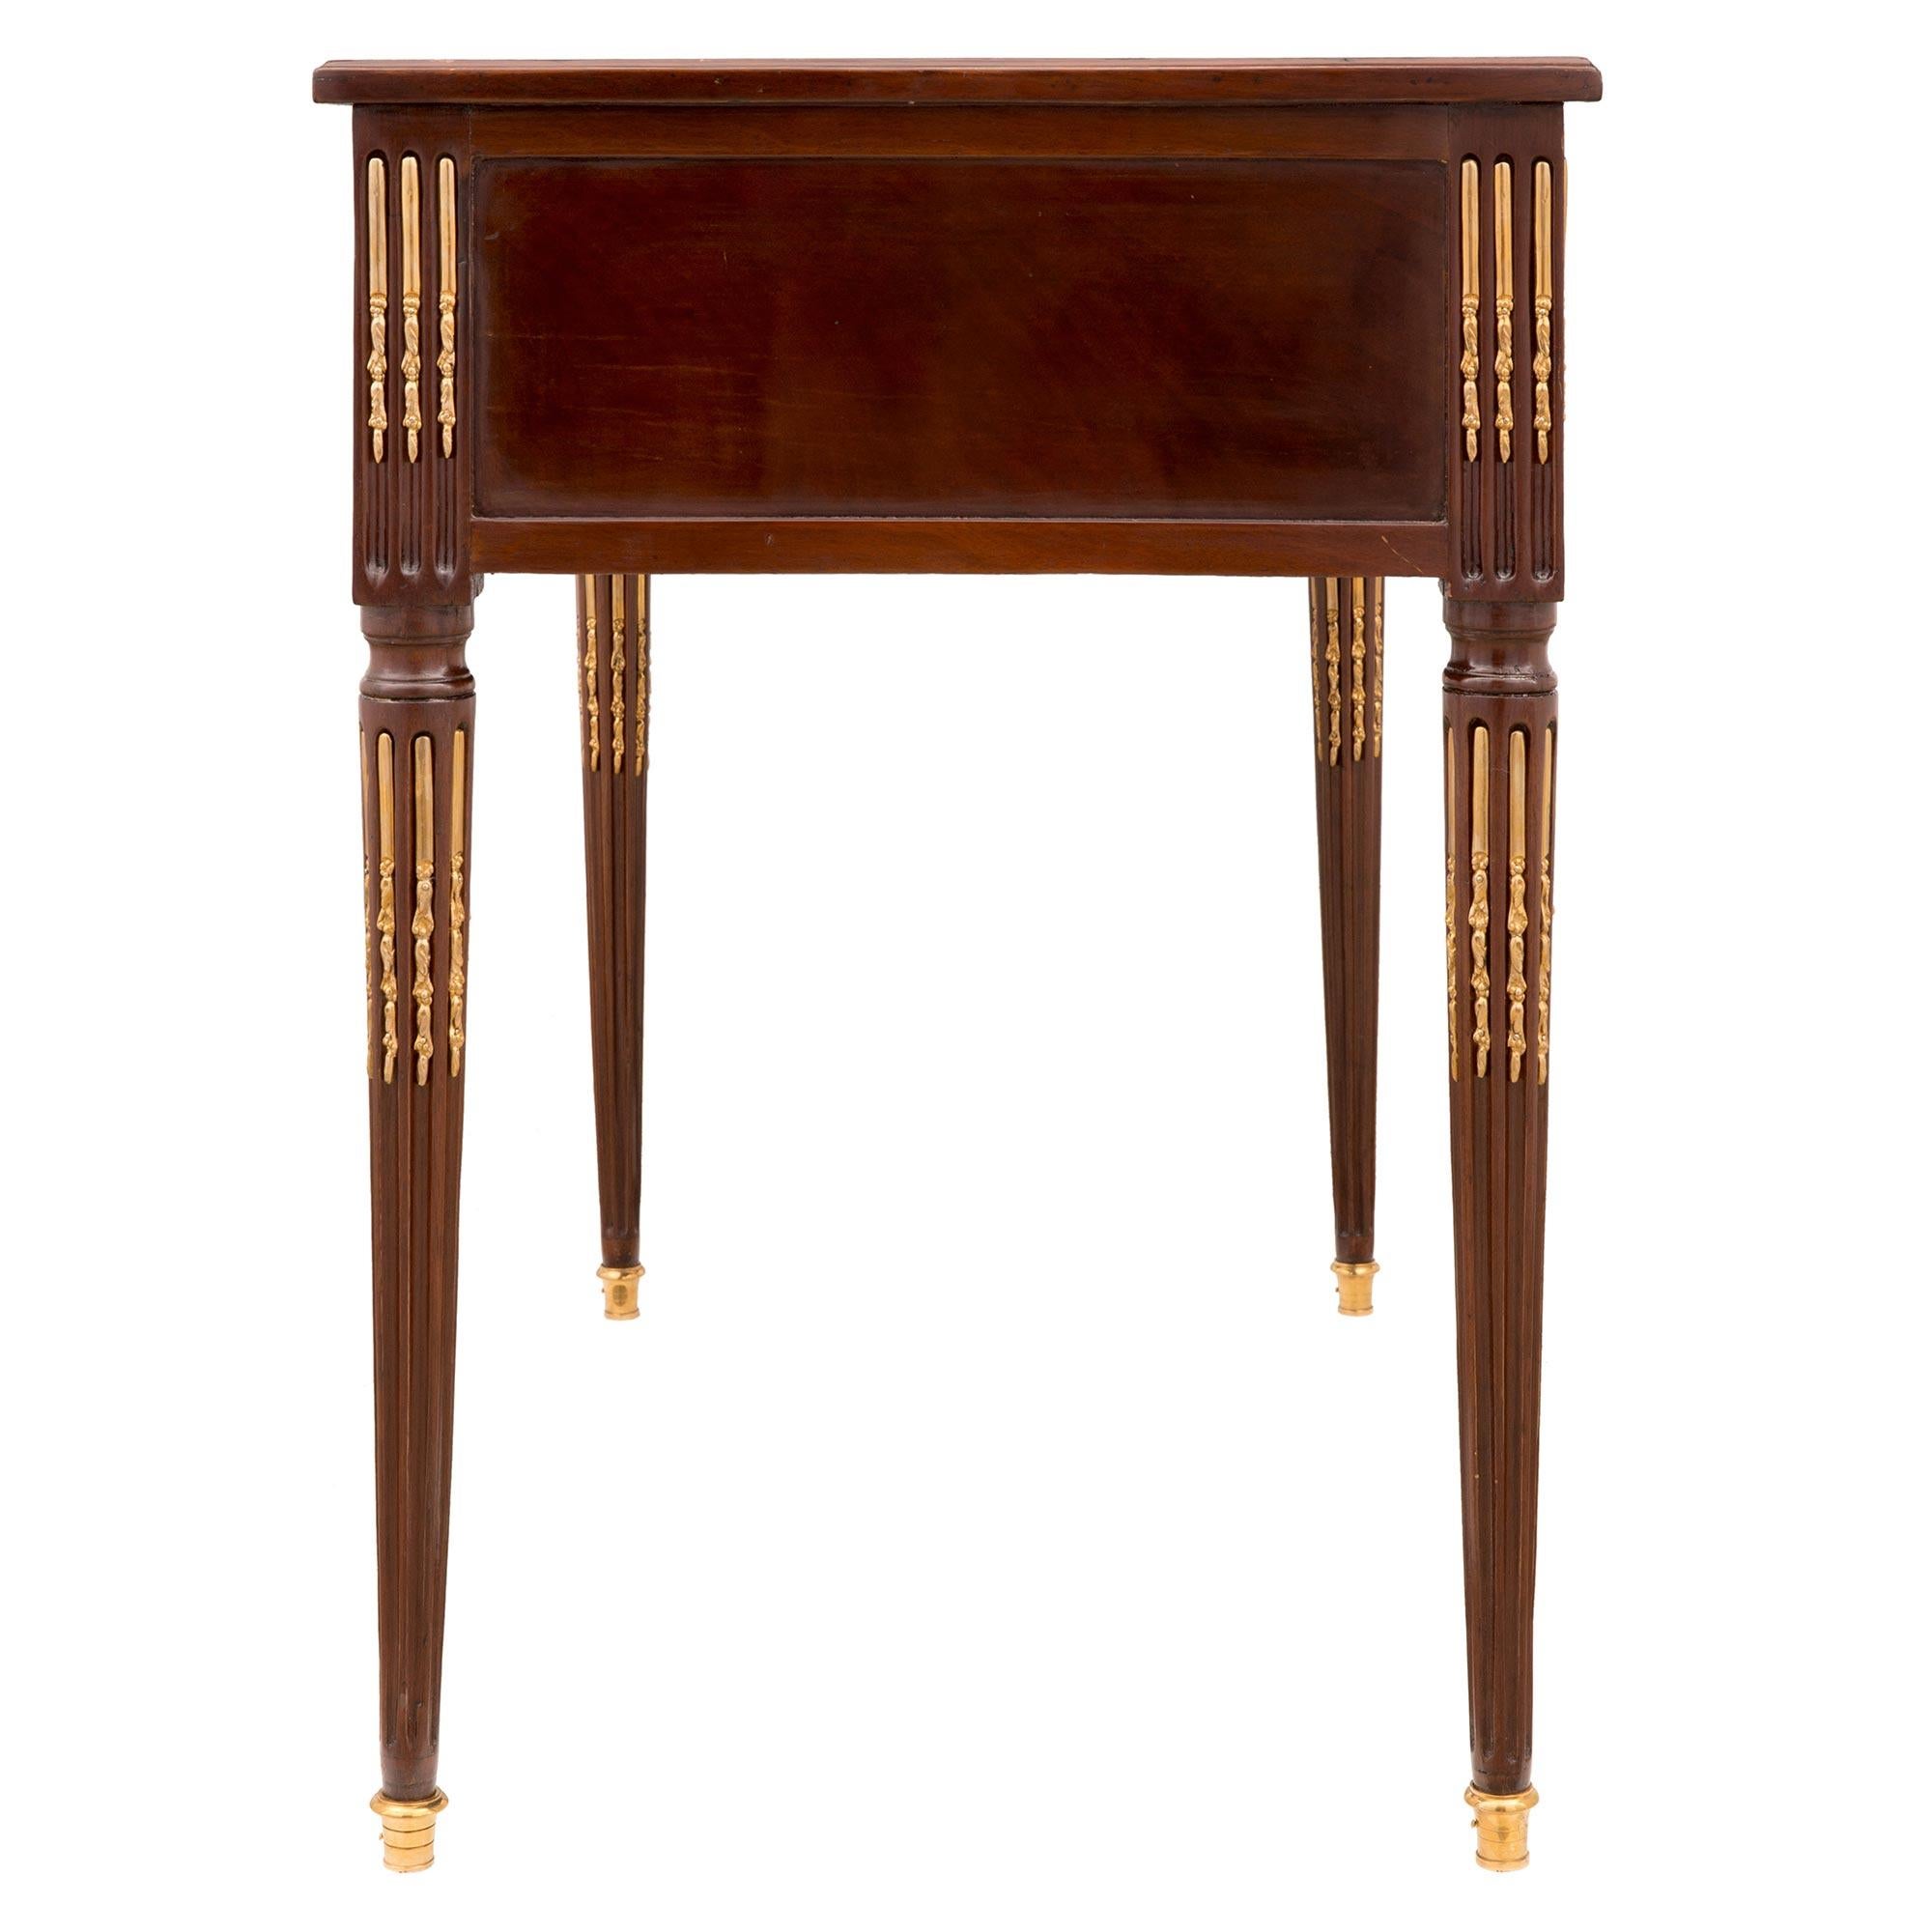 18th Century and Earlier French 18th Century Louis XVI Period Mahogany and Ormolu Desk/Writing Table For Sale